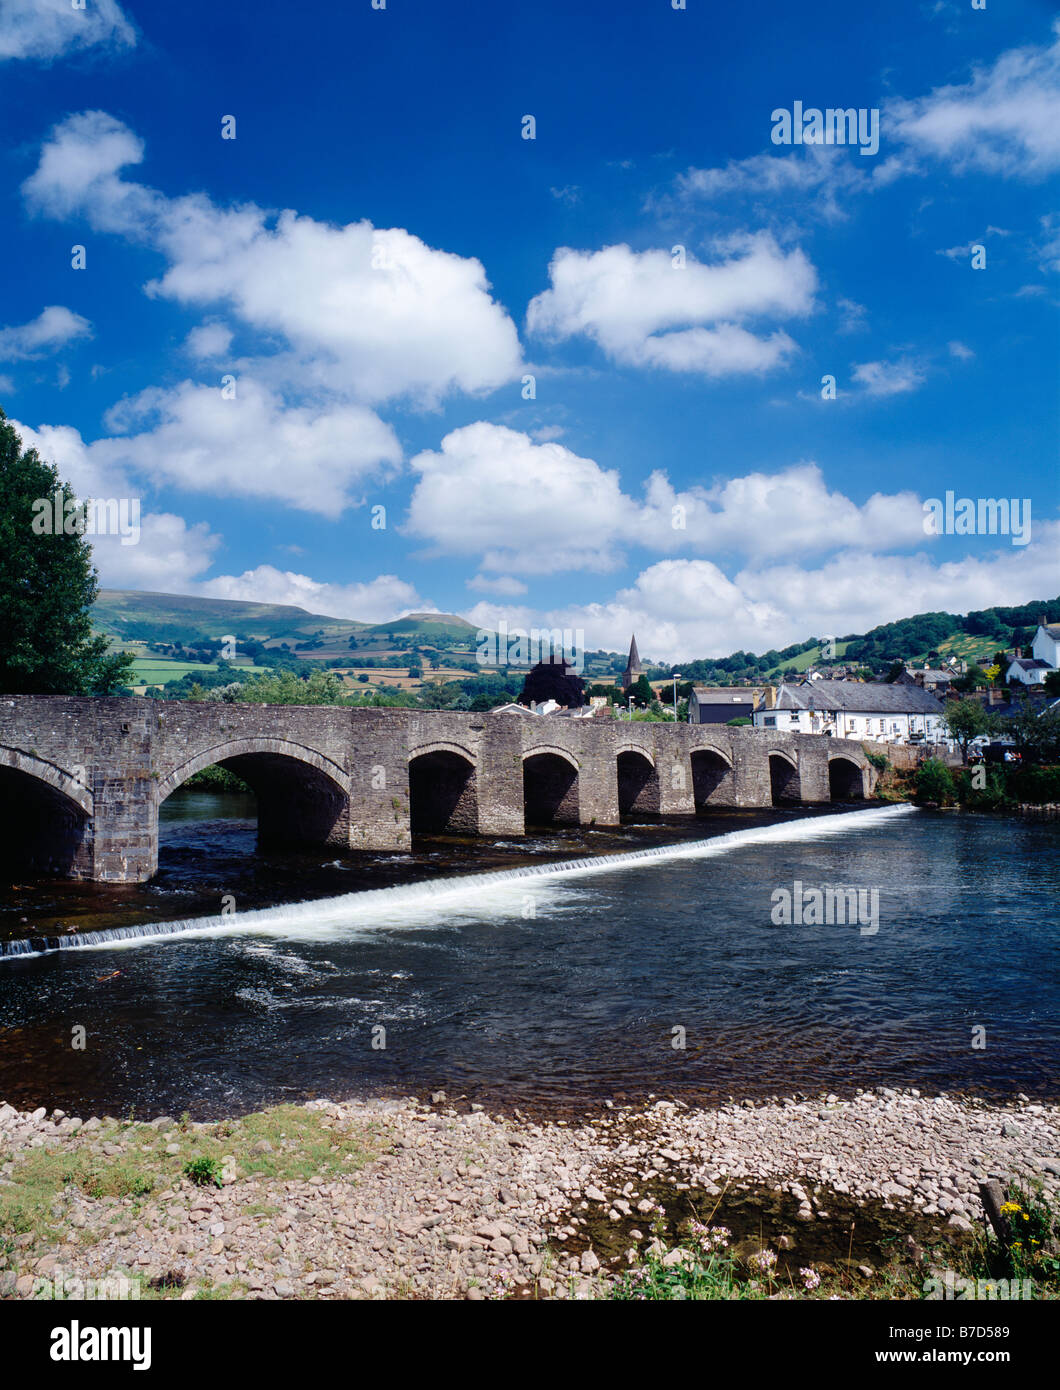 Crickhowell road bridge over the River Usk in the Bannau Brycheiniog (formerly Brecon Beacons) National Park, Crickhowell, Powys, South Wales. Part of the Black Mountains, including Table Mountain, can be seen behind the bridge. Stock Photo